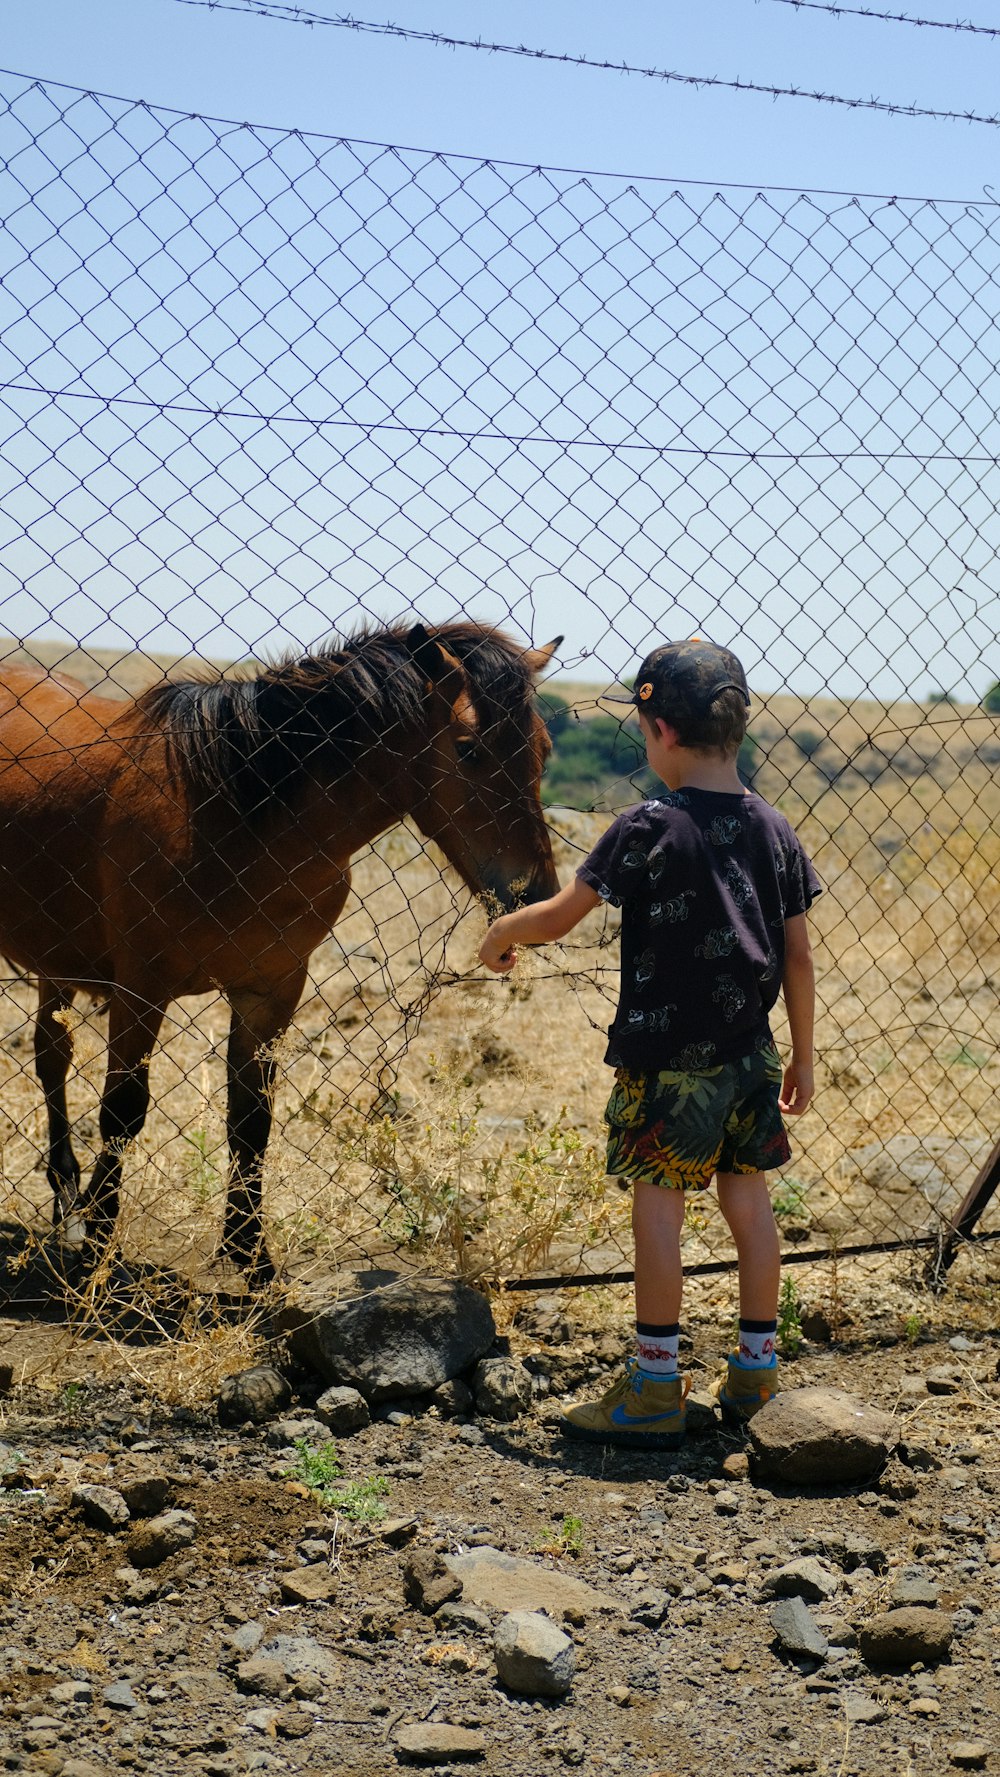 boy in black t-shirt standing beside brown horse during daytime